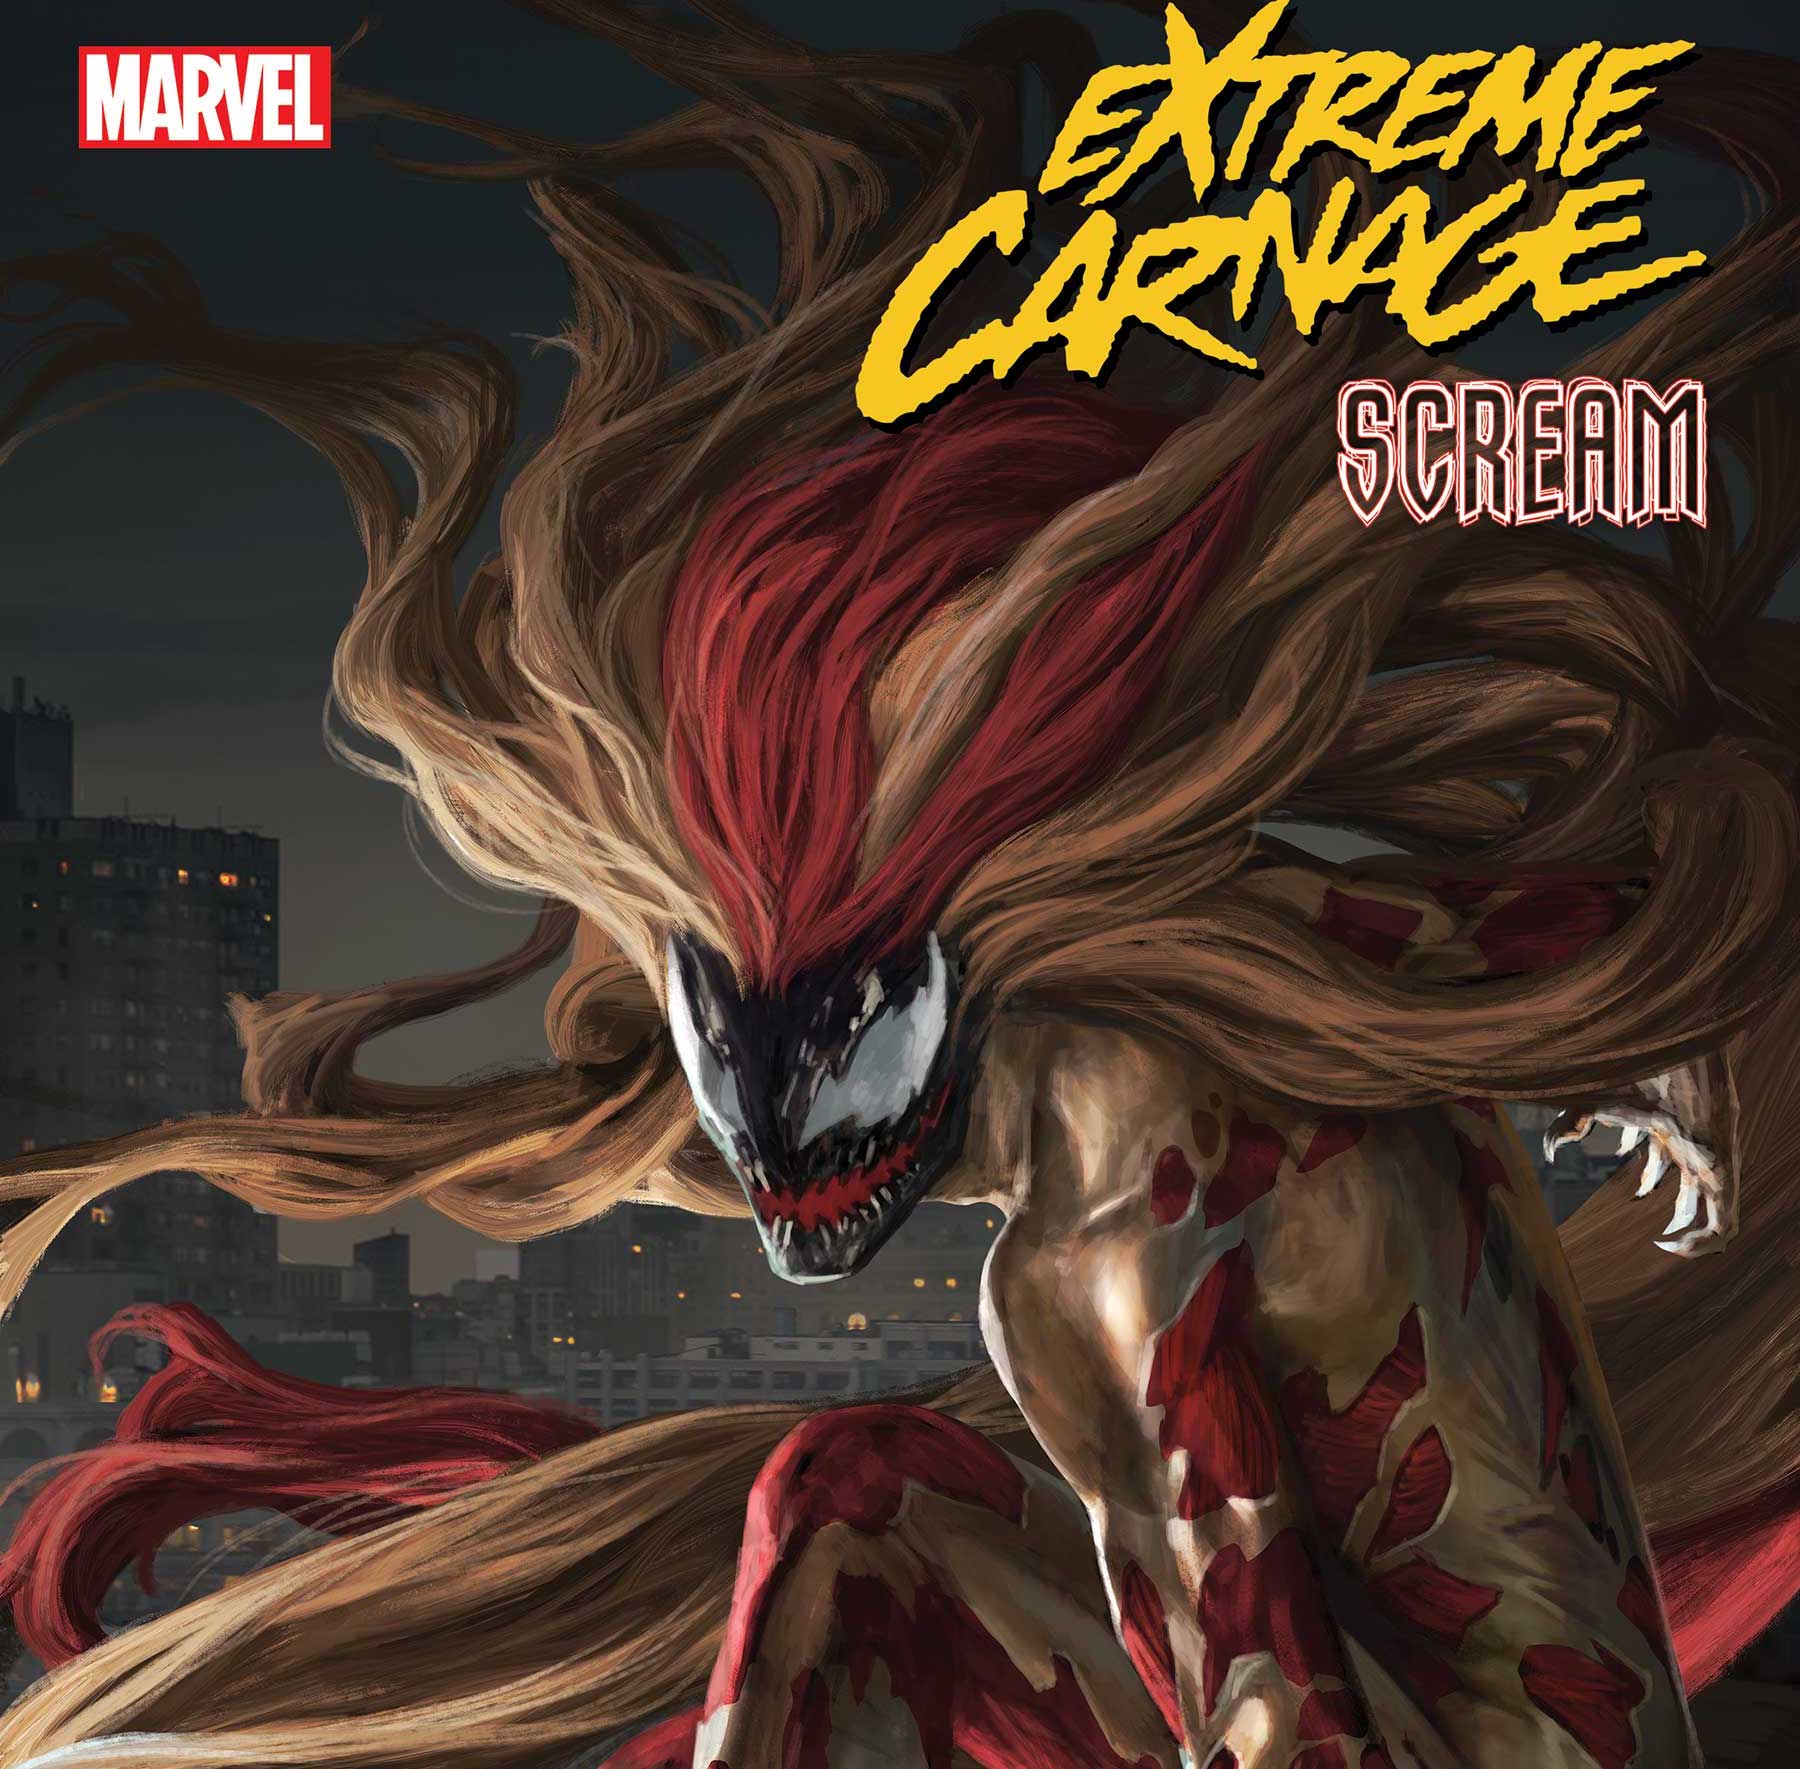 Marvel sets Clay McLeod Chapman and Chris Mooneyham on 'Extreme Carnage: Scream' #1